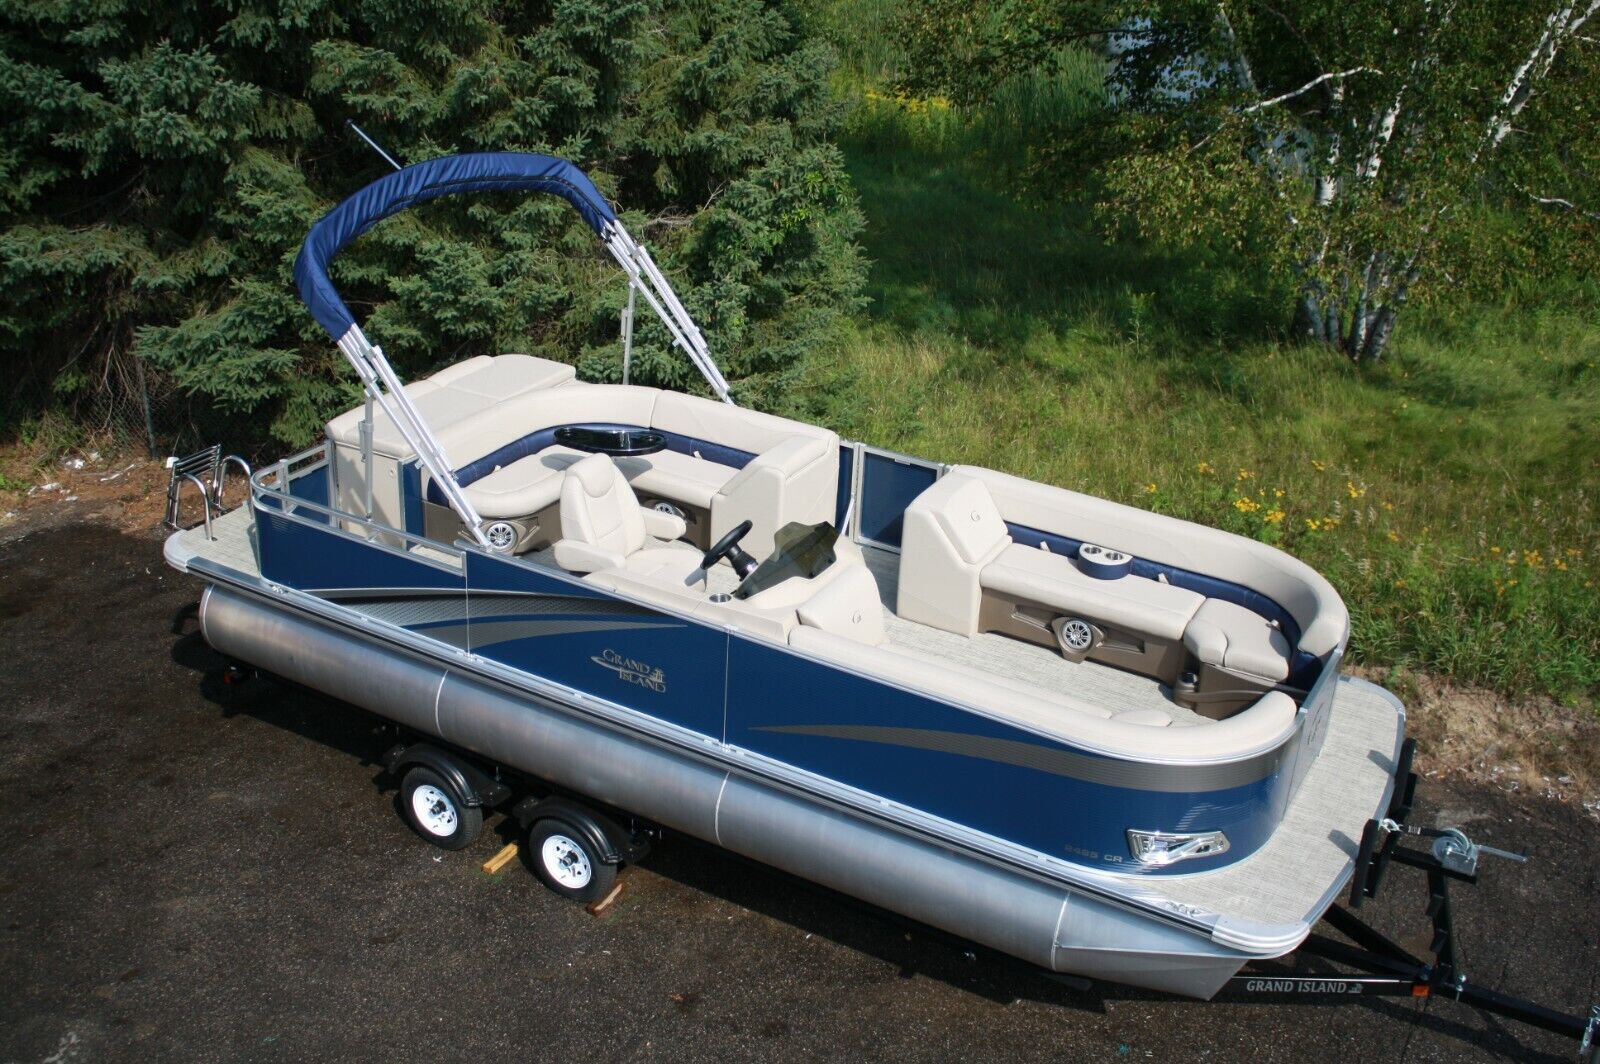 Two tube-New 24 ft pontoon boat with 115 hp and trailer